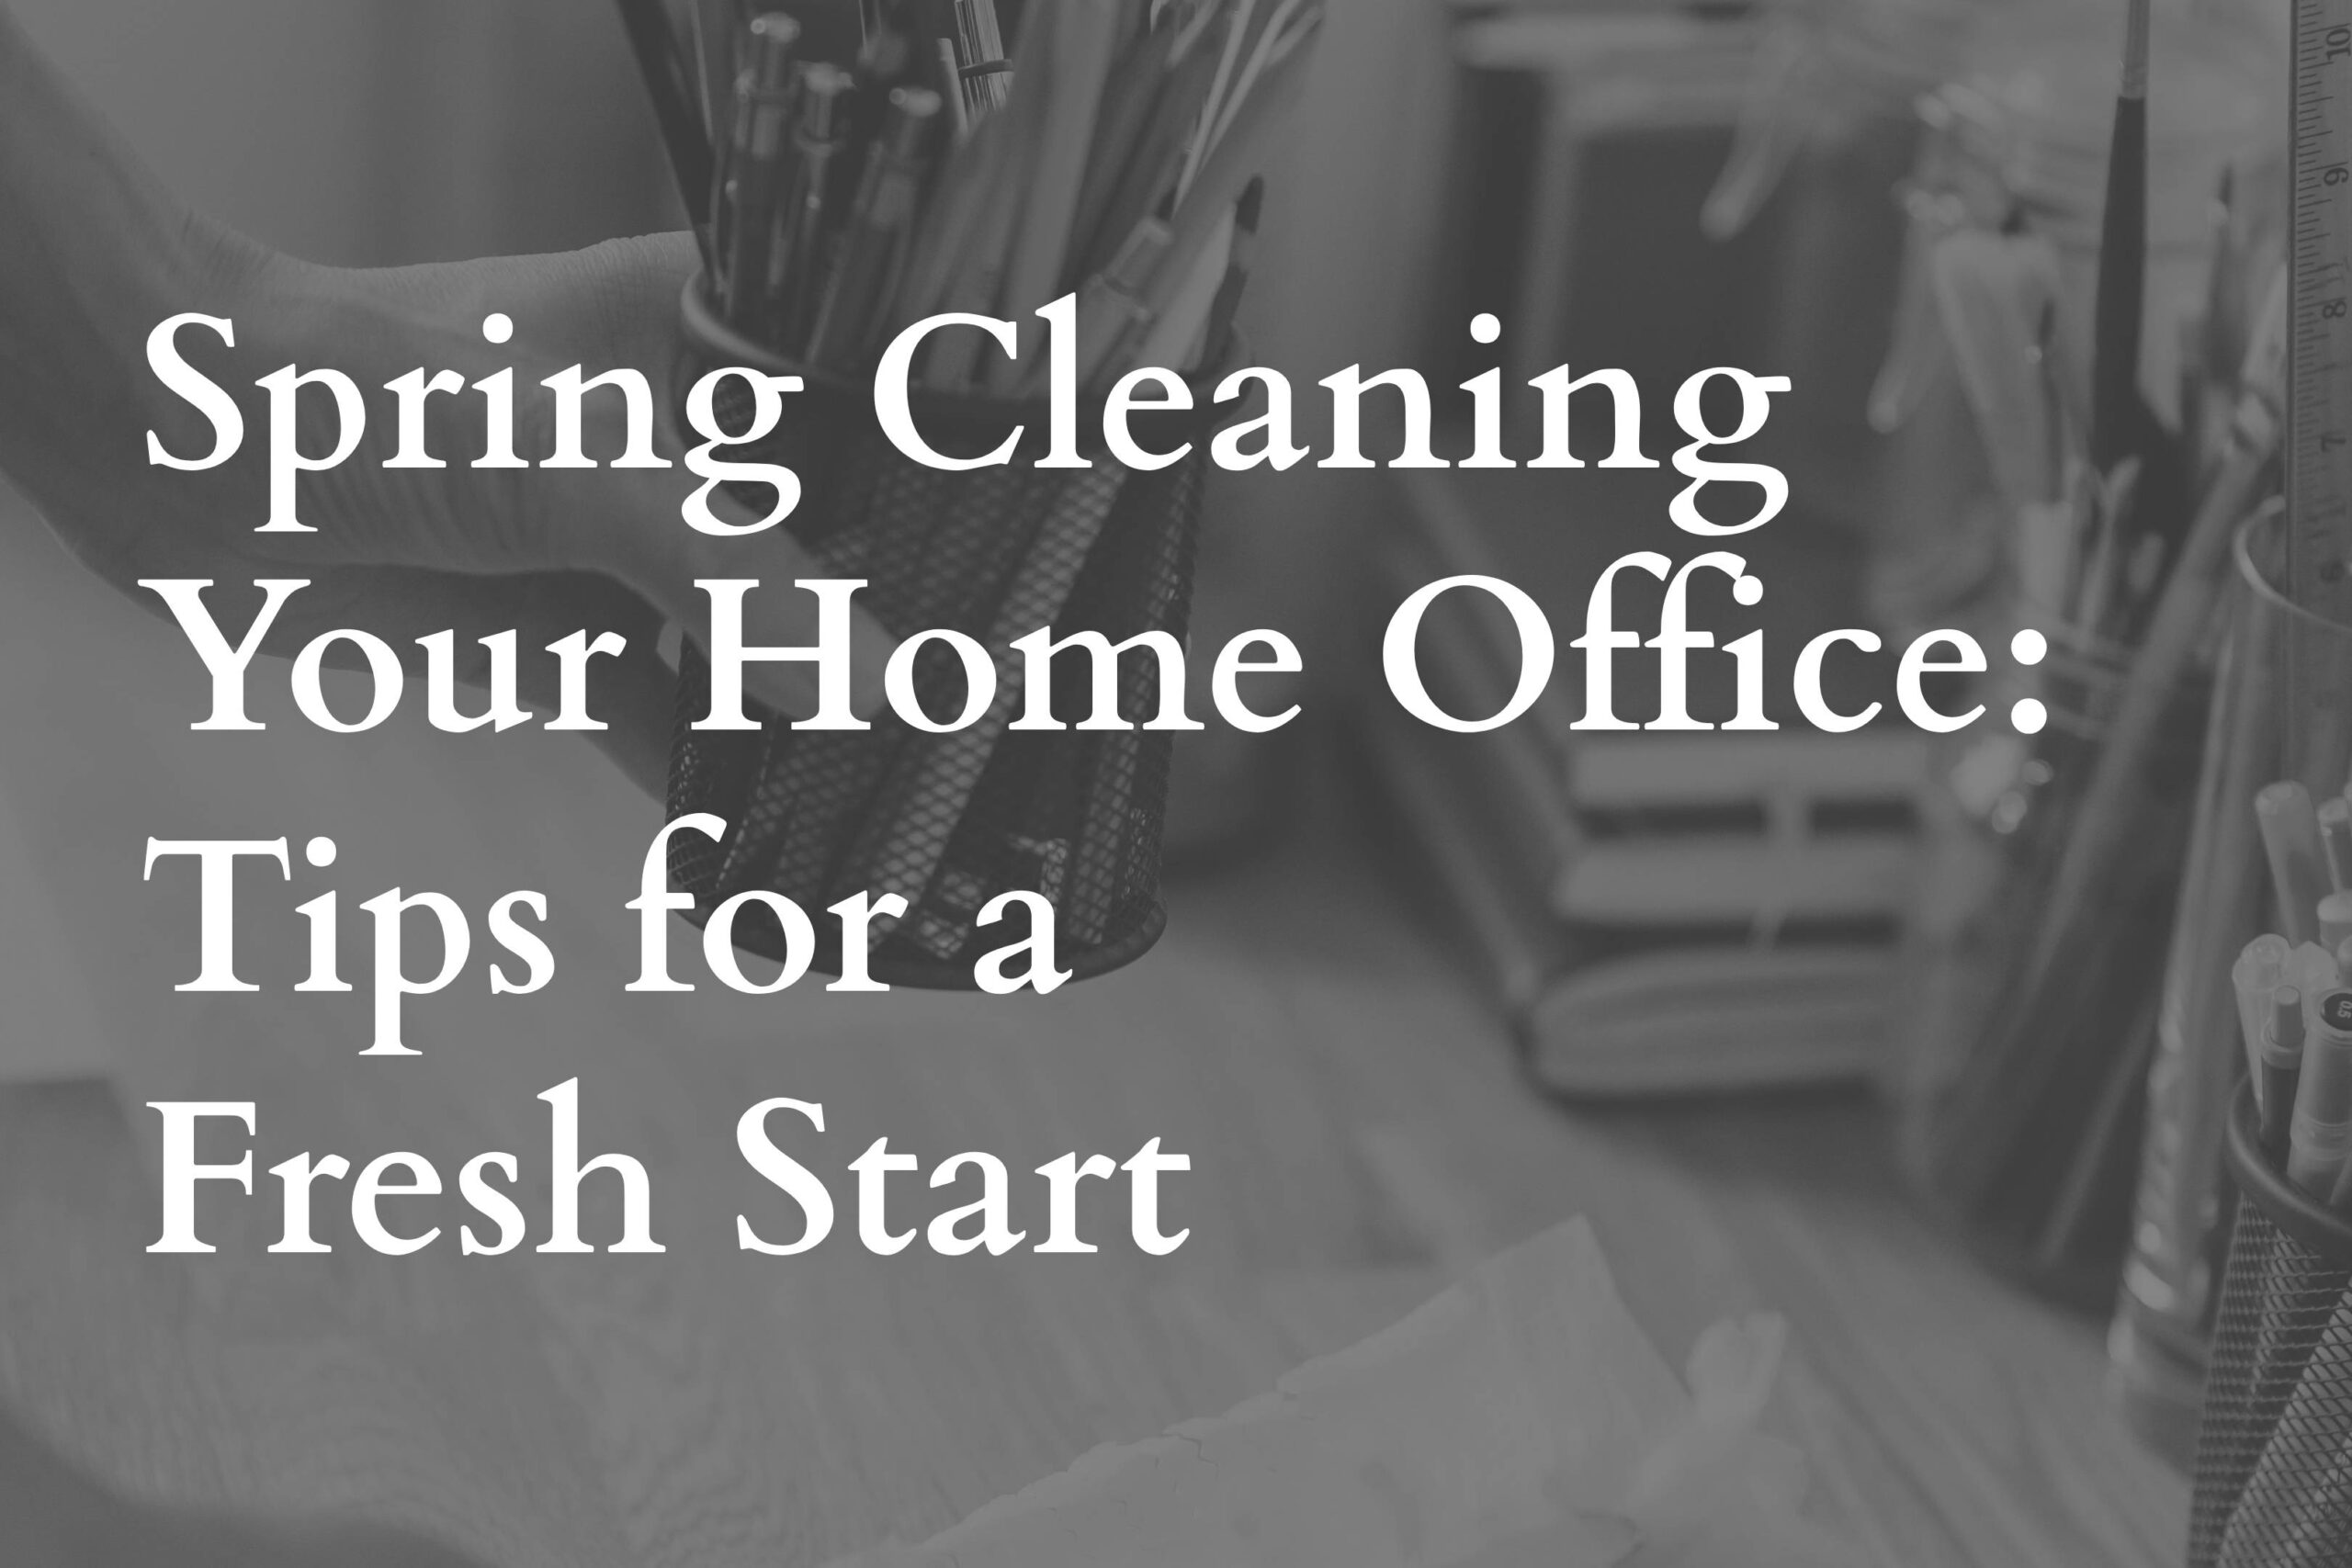 Spring Cleaning Your Home Office: Tips for a Fresh Start